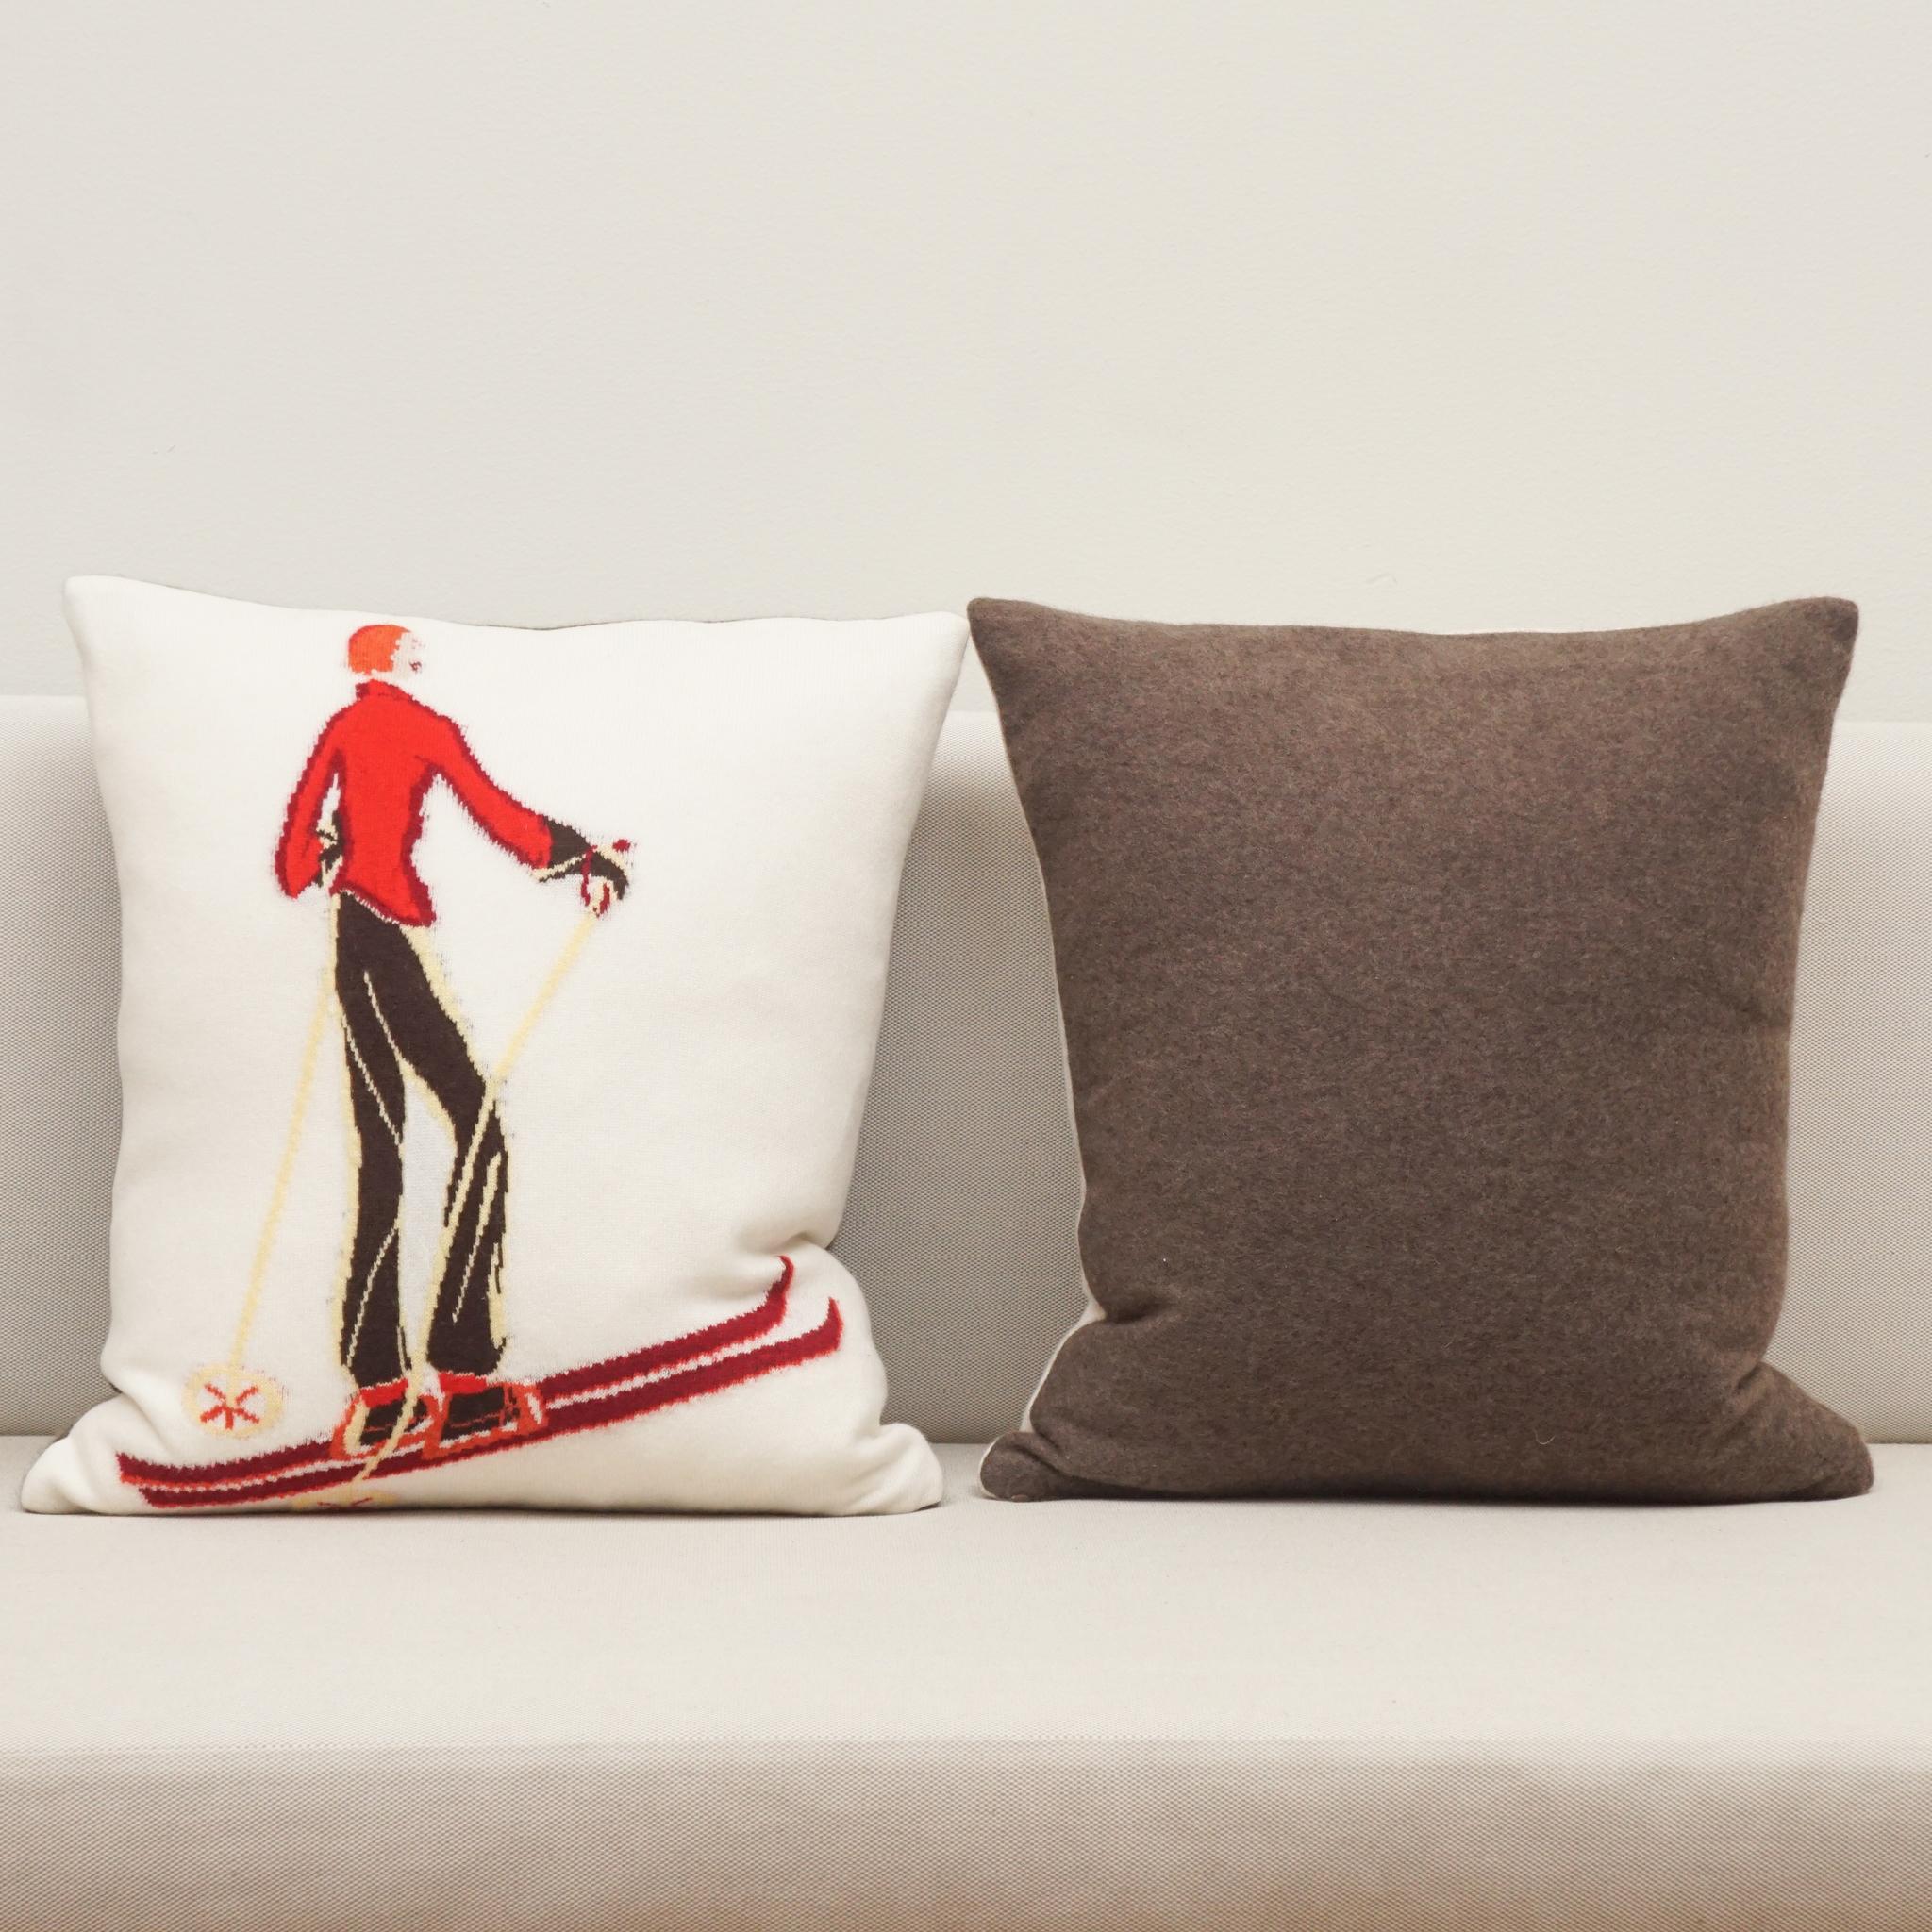   The decorative pillows, shown here, are certain to become one of your seasonal favorites for years to come.  Made in Austria, each ivory cashmere pillow is woven with an animated and brightly colored skier making them both decorative and